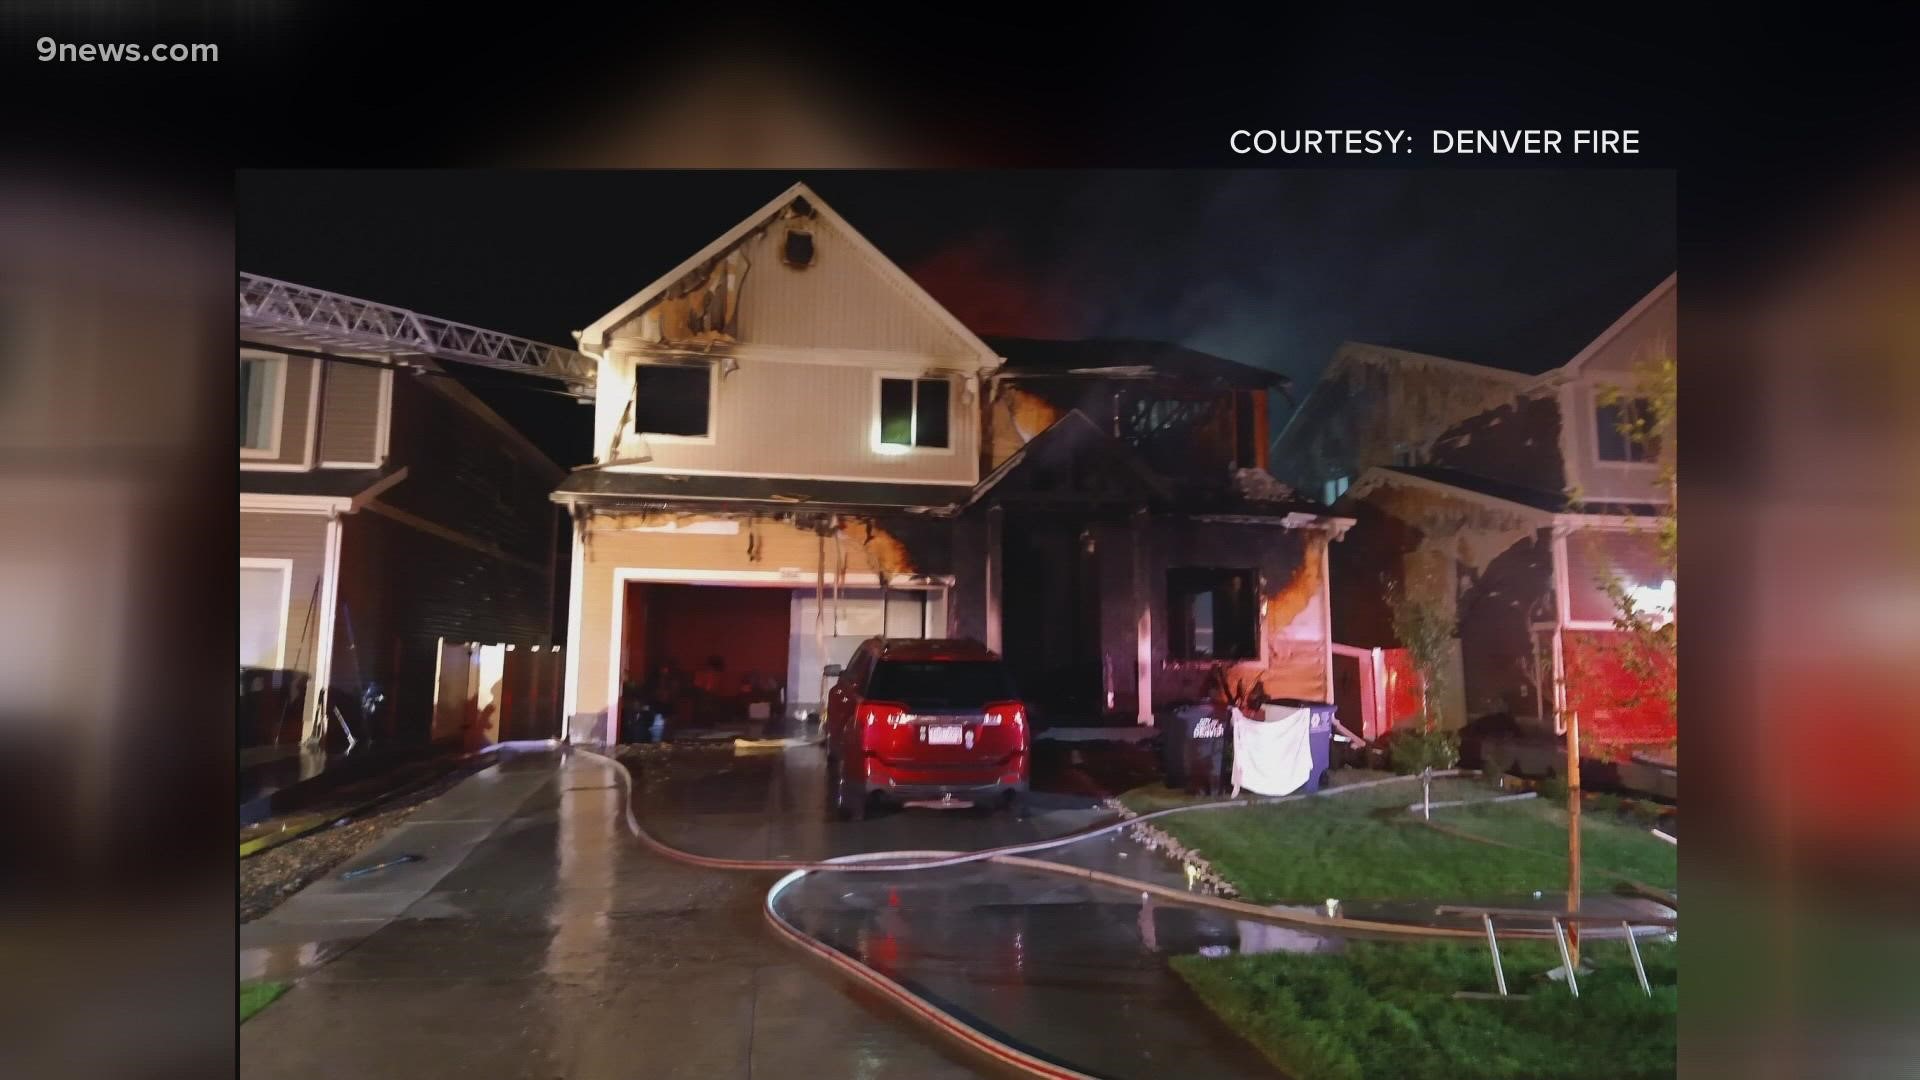 The teens accused of setting the fatal fire in Green Valley Ranch in August 2020 targeted the wrong home, according to a Denver detective.